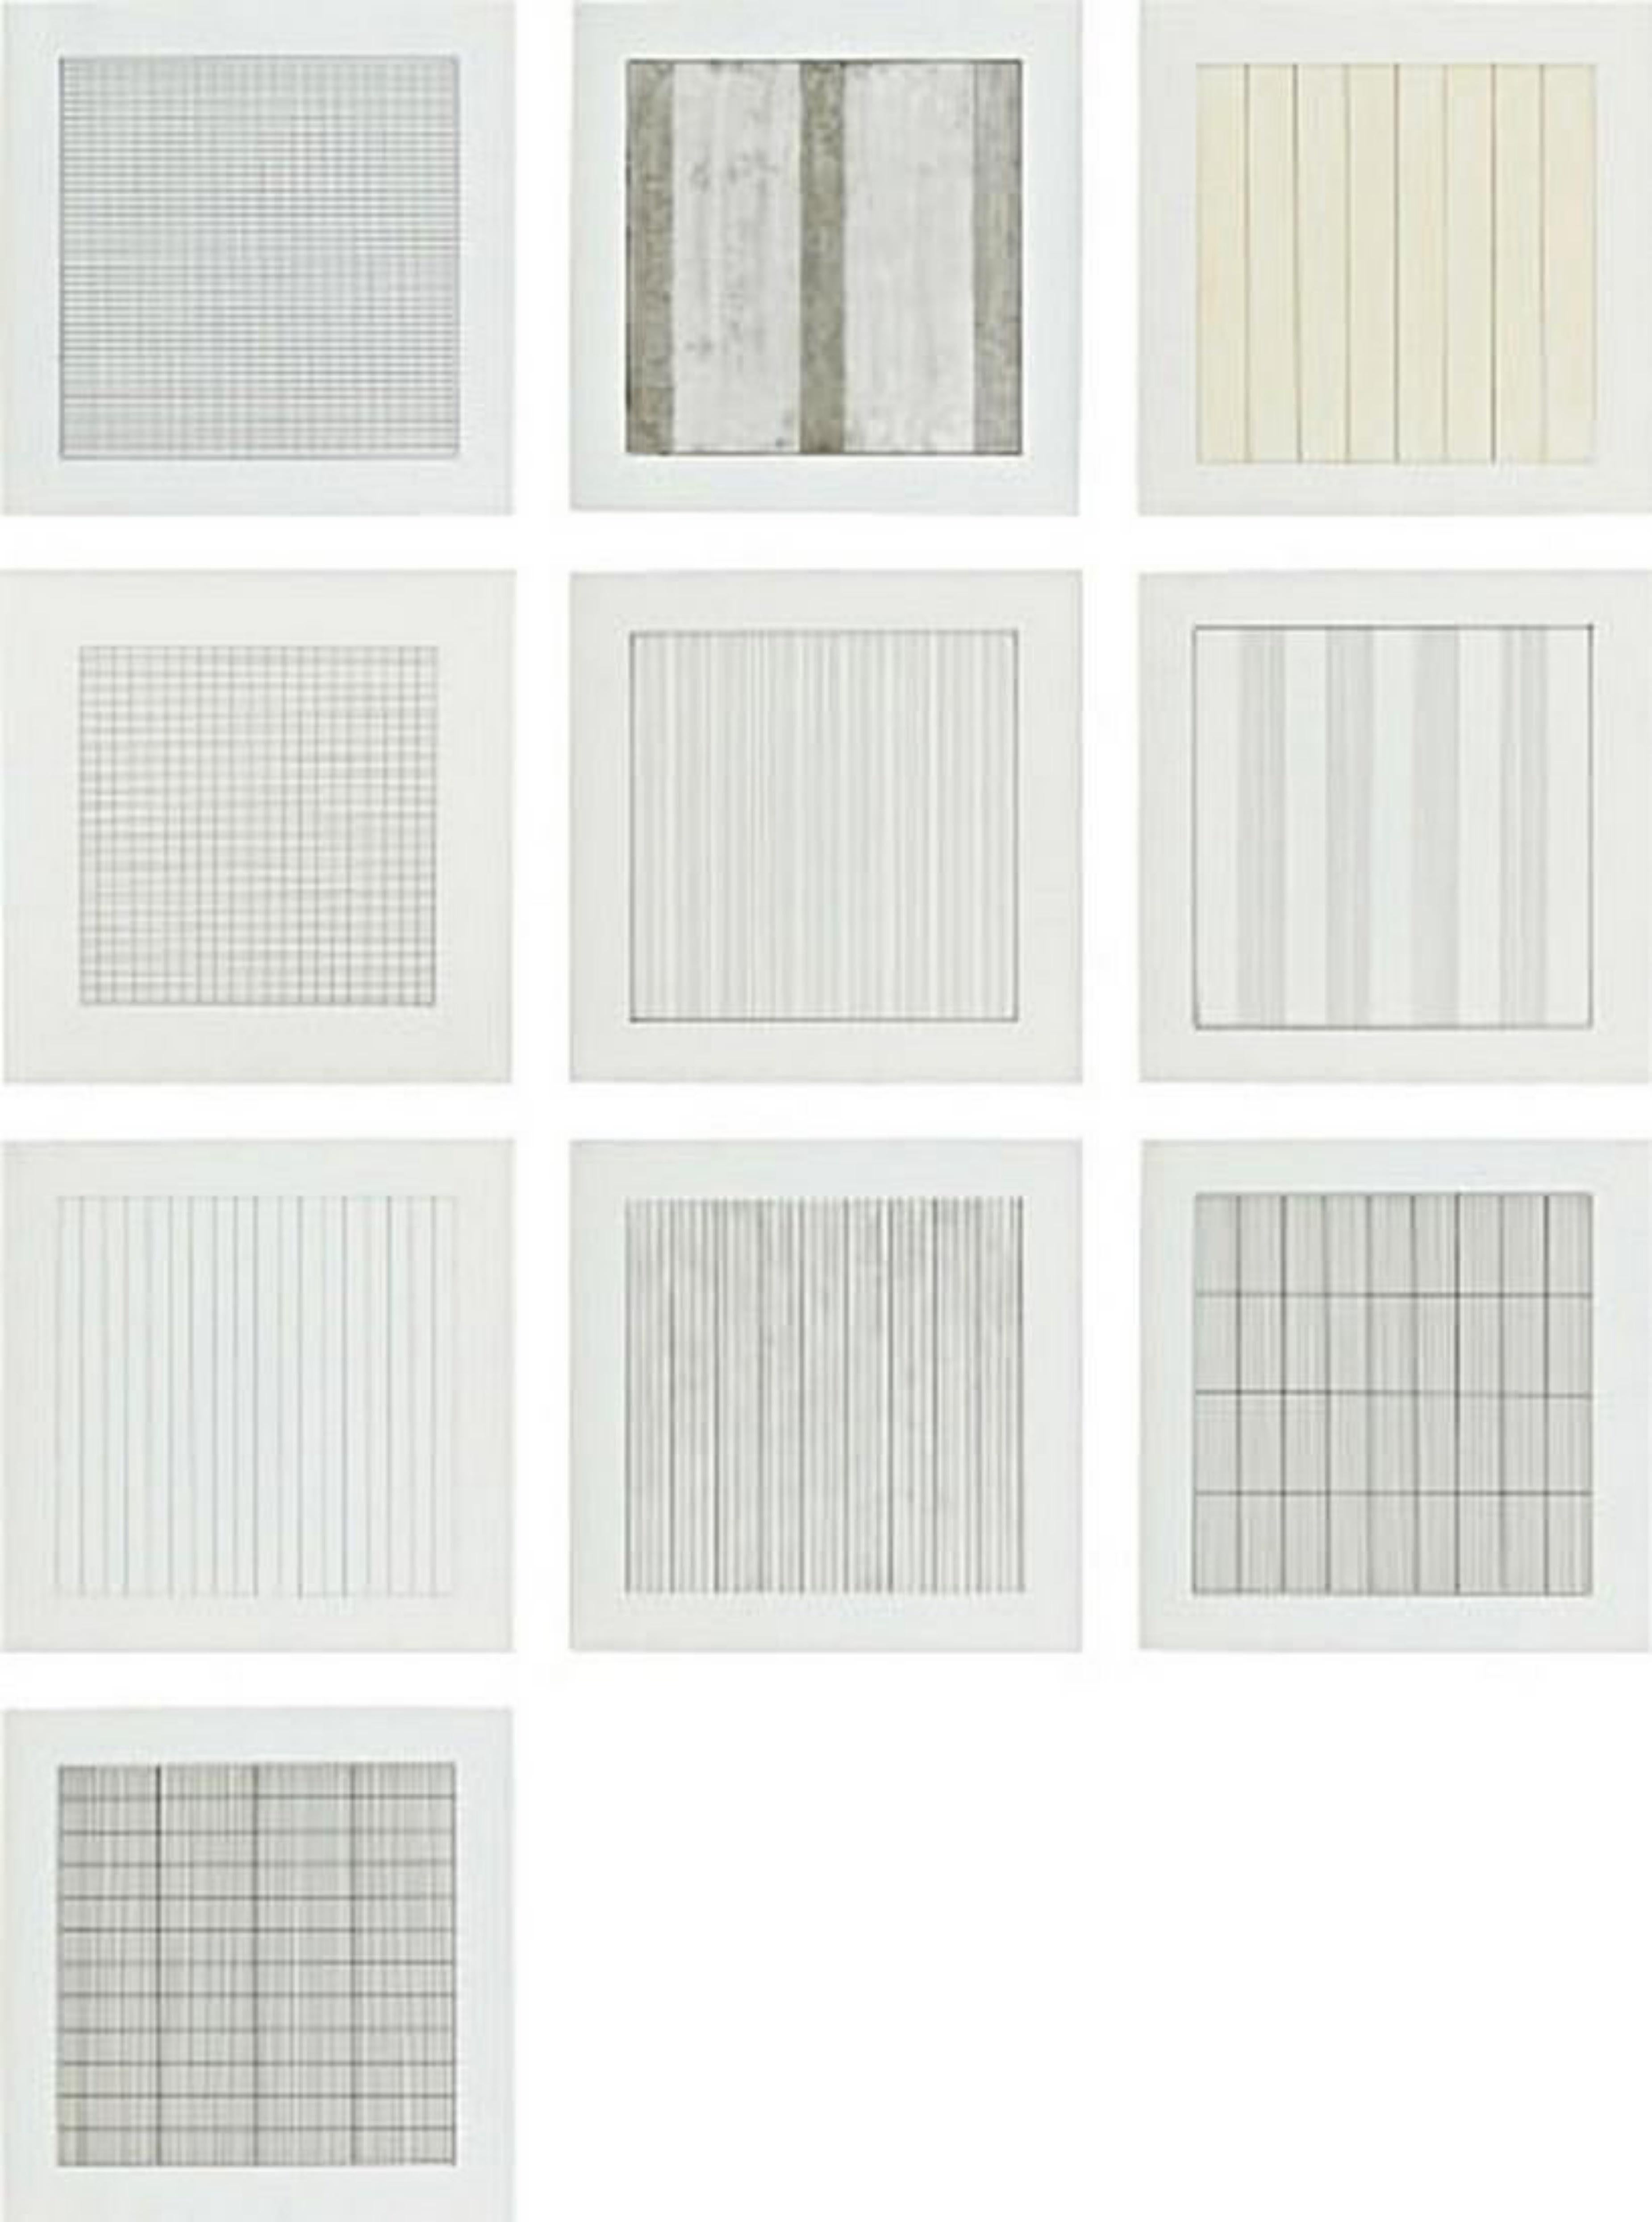 AGNES MARTIN
Paintings and Drawings 1974-1990: Stedelijk Museum, Amsterdam, 1991
The complete set of 10 lithographs in colours, on vellum parchment paper, with full margins, the sheets loose (as issued) all contained in the original grey card